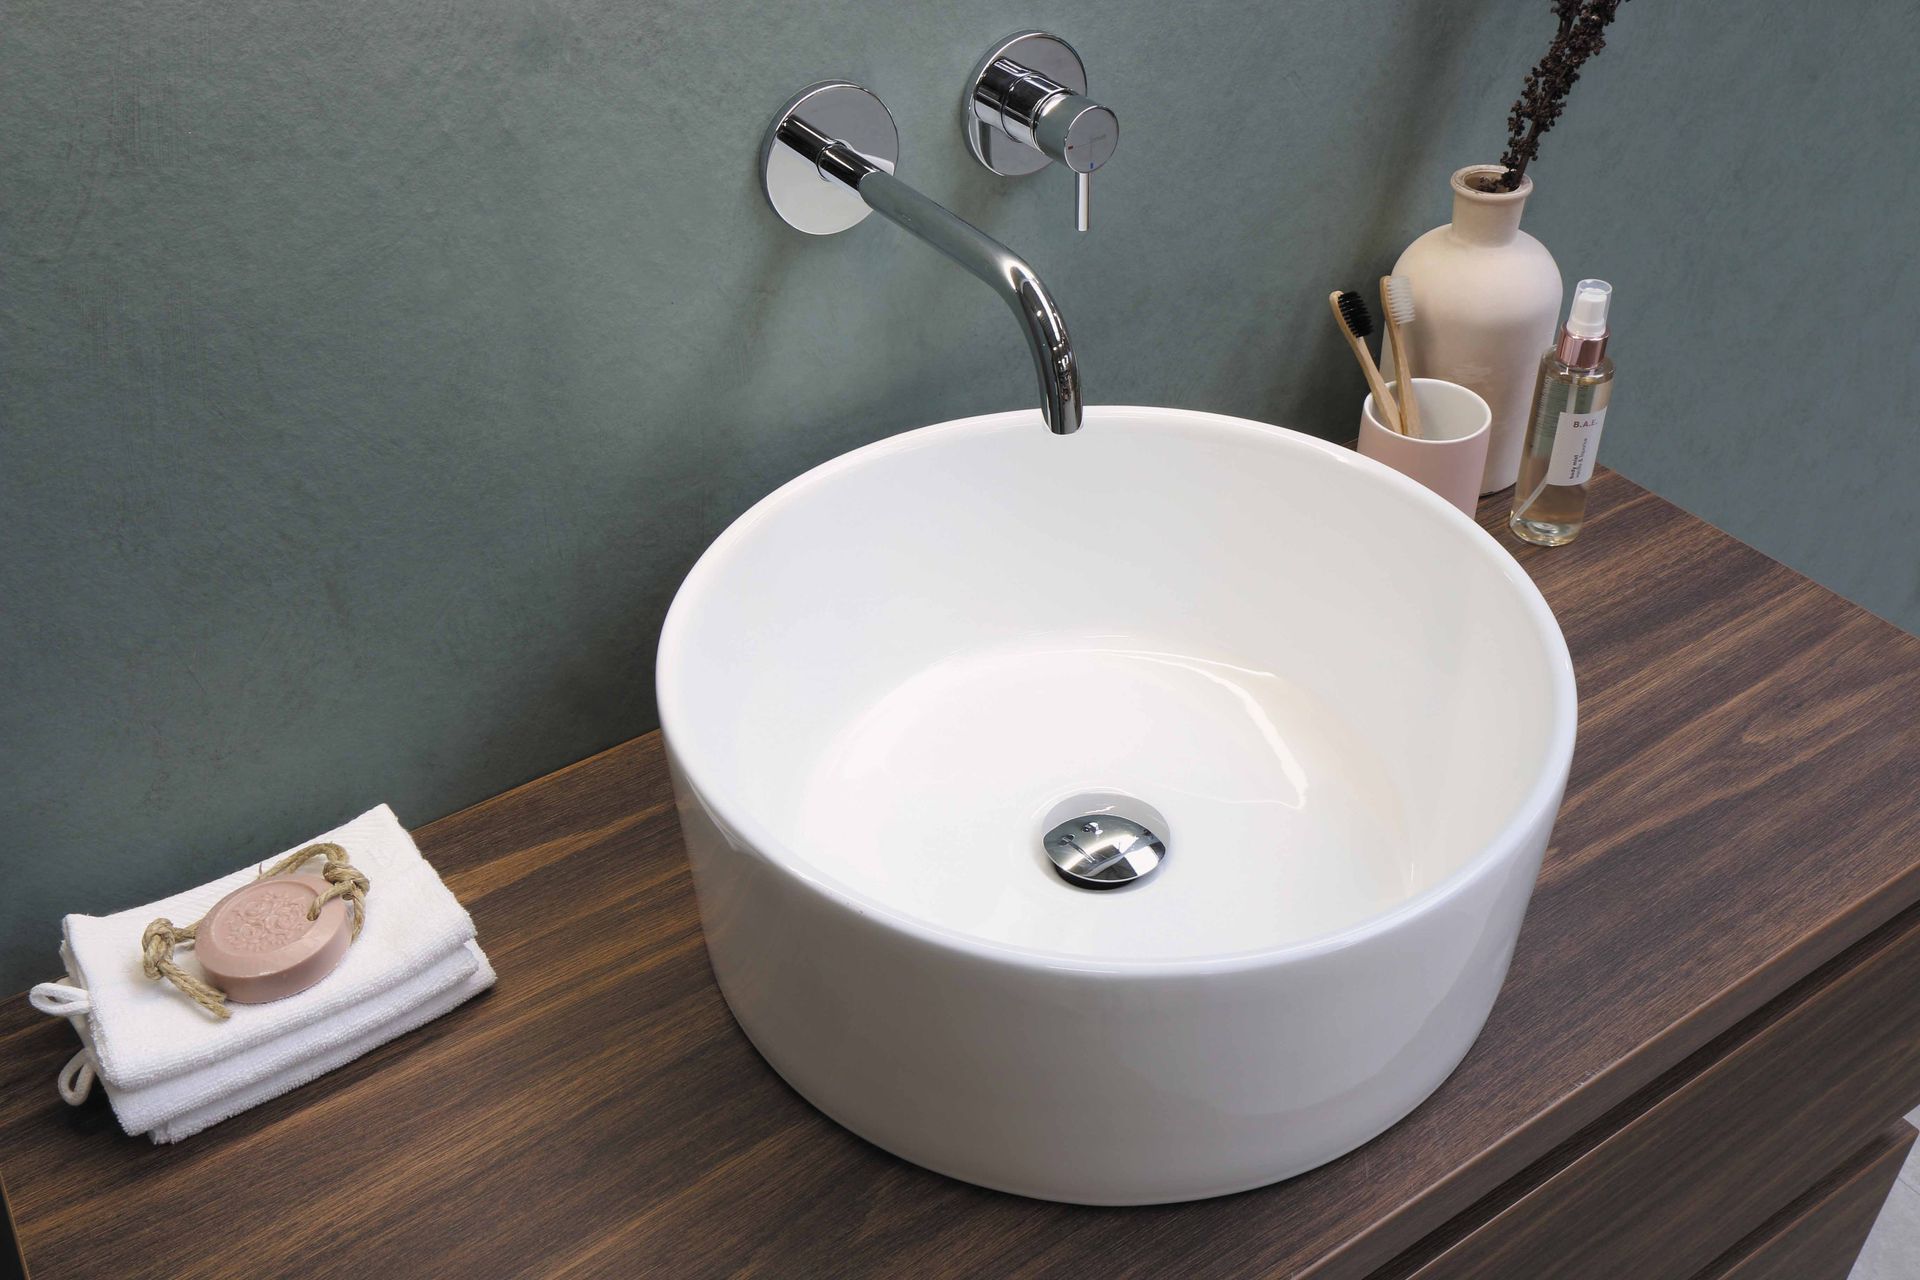 White circular ceramic sink with a sleek stainless steel faucet.